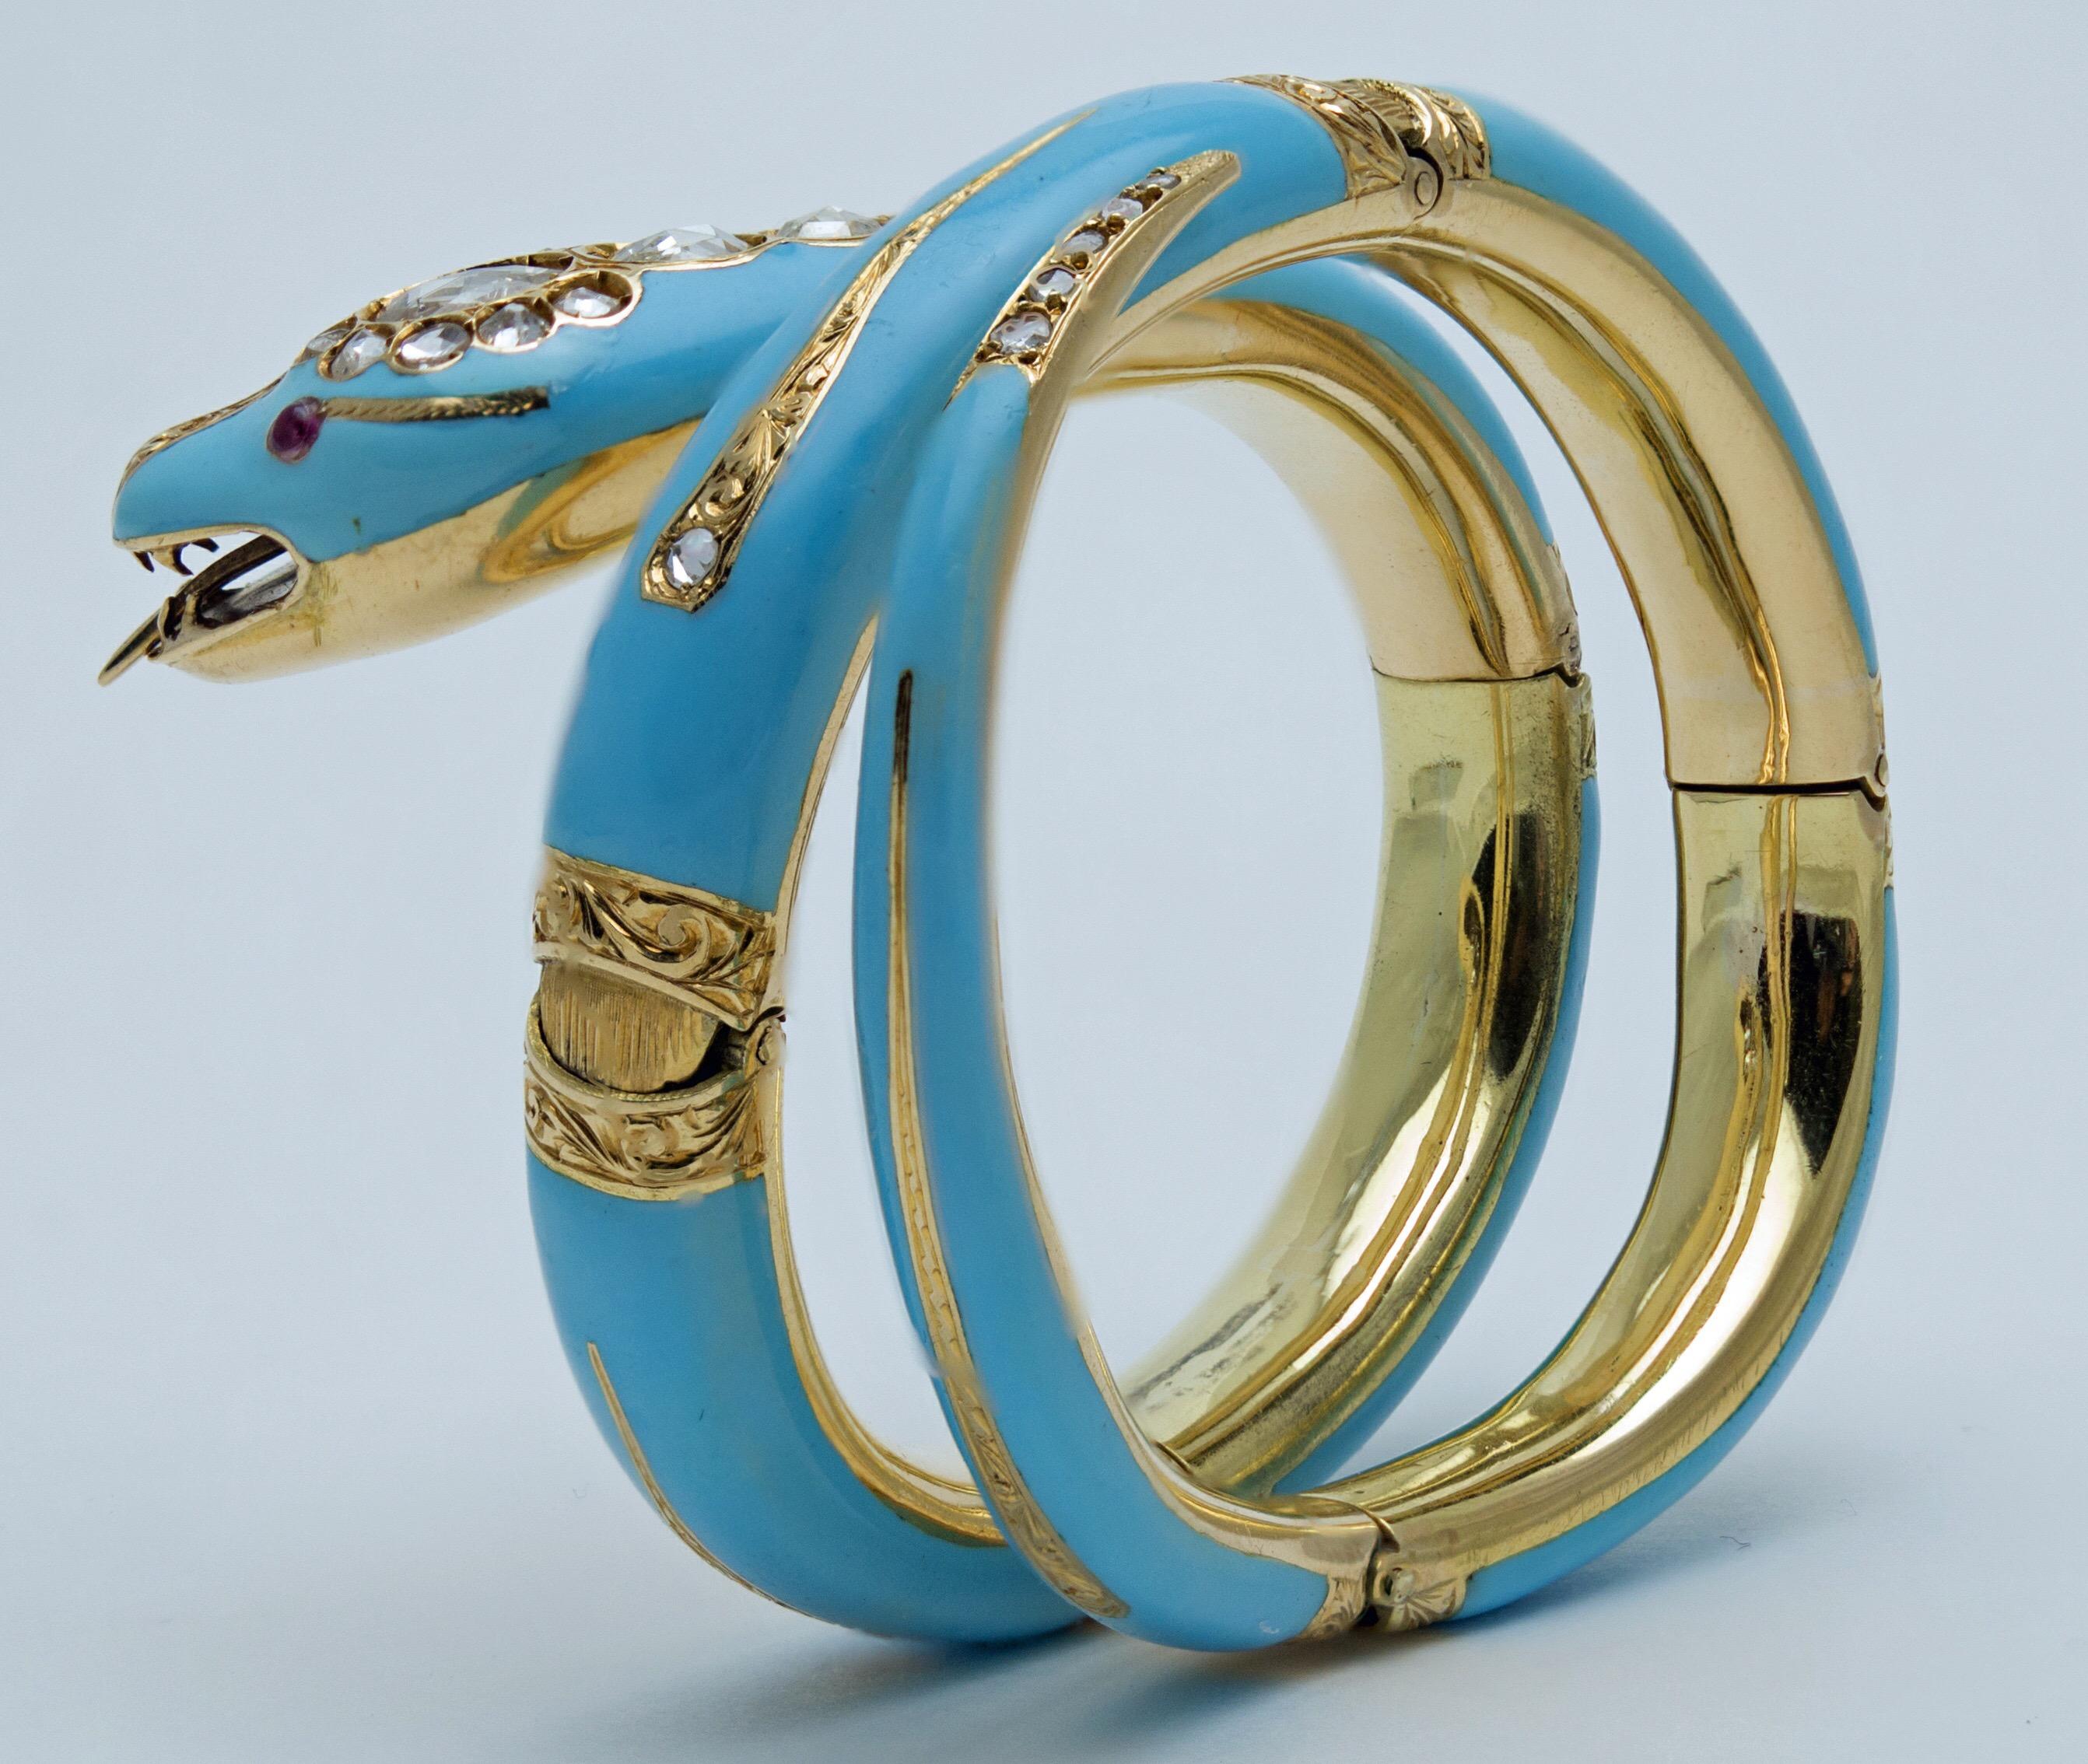 A stunning and elegant triple coiled snake bracelet in a gorgeous turquoise blue enamel over 18k gold, accented with old European cut diamonds and rubies for eyes. With an articulated forked tongue. 
The body of the snake also articulated, with six